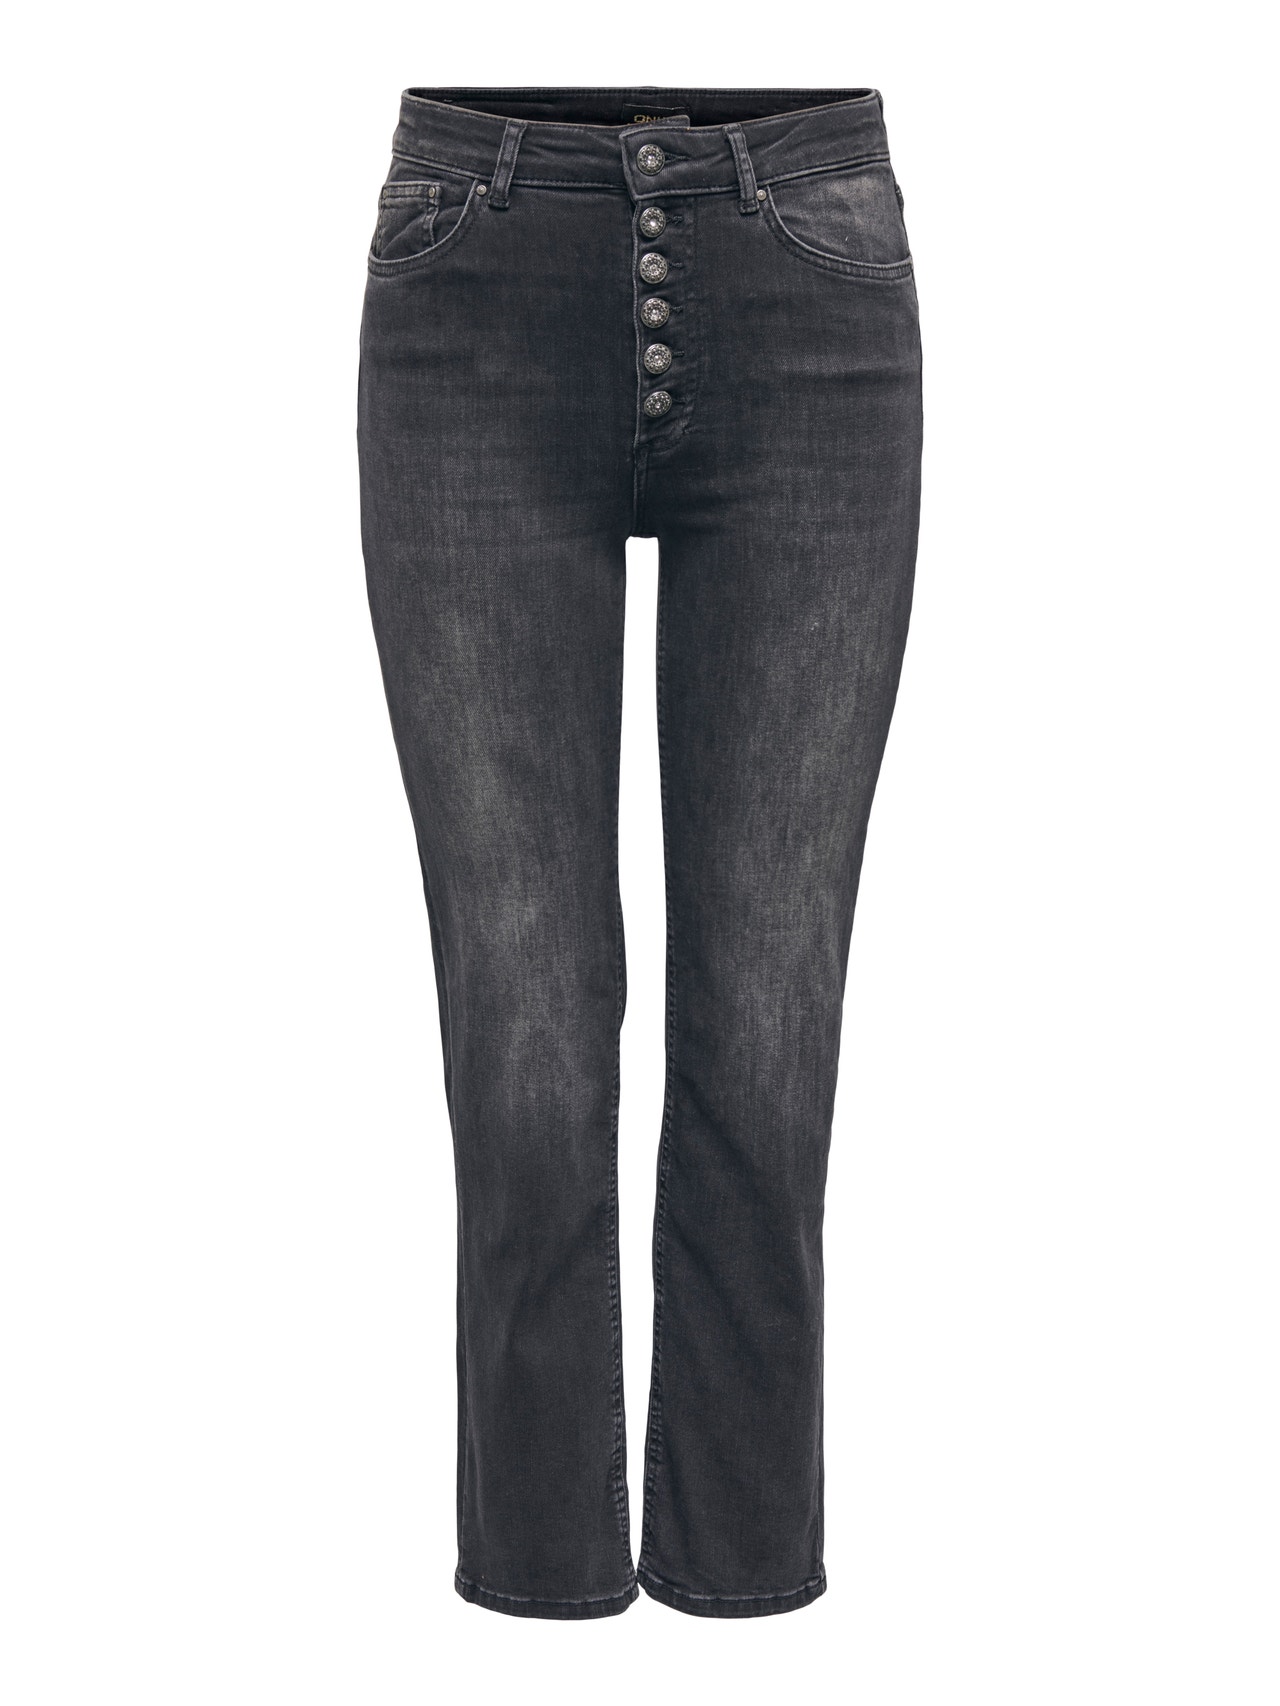 ONLY Gerade geschnitten Hohe Taille Jeans -Washed Black - 15265417